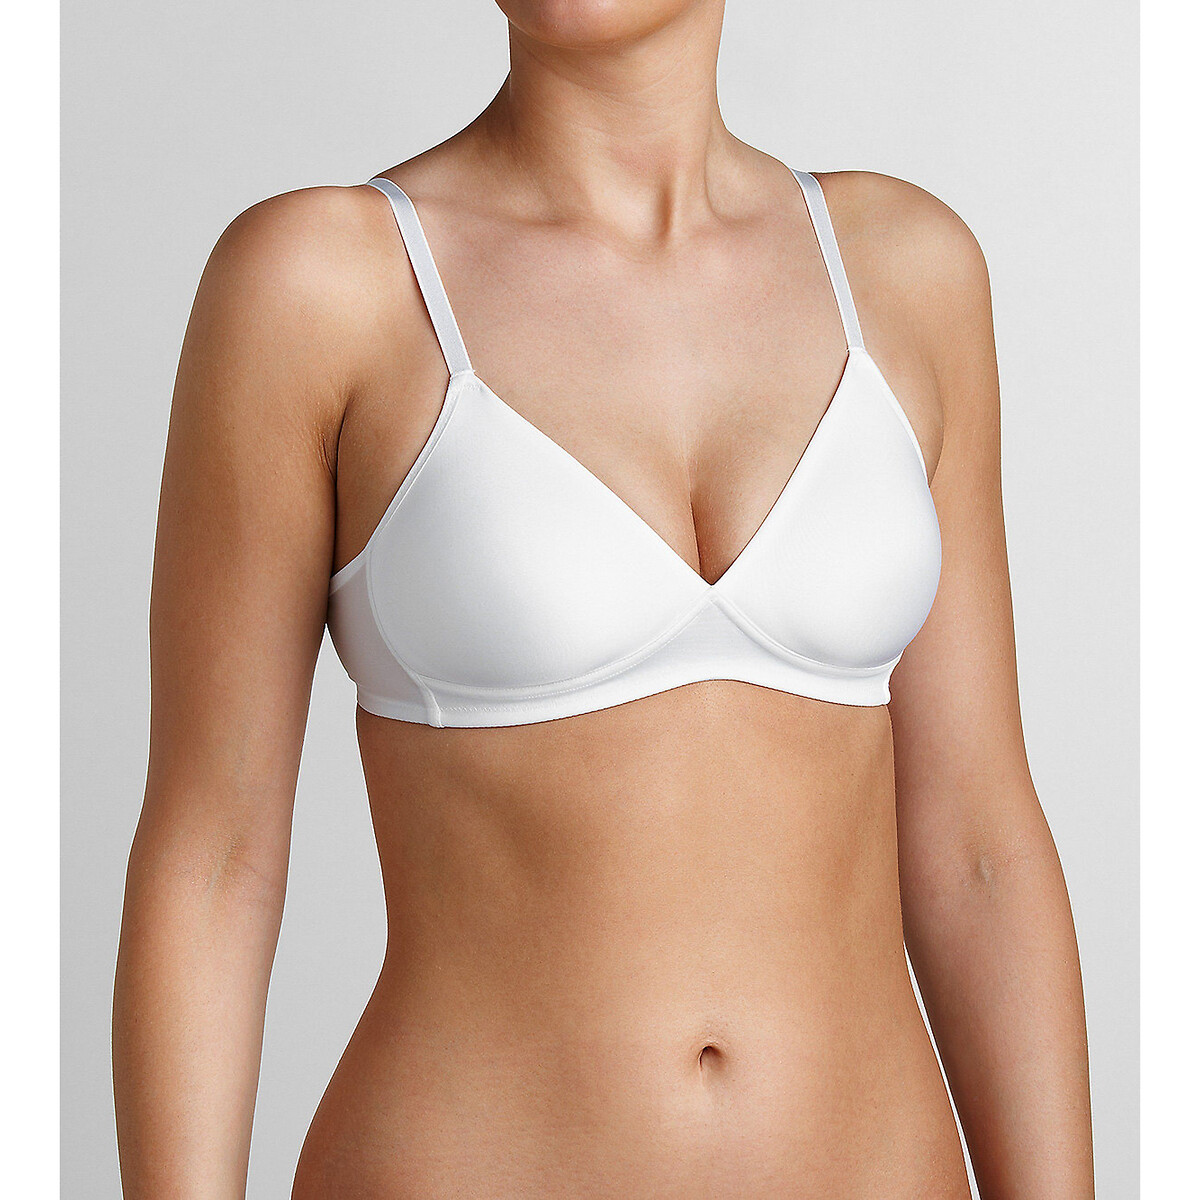 Tommy Hilfiger Dames Push-up BH's SALE • Tot 50% korting